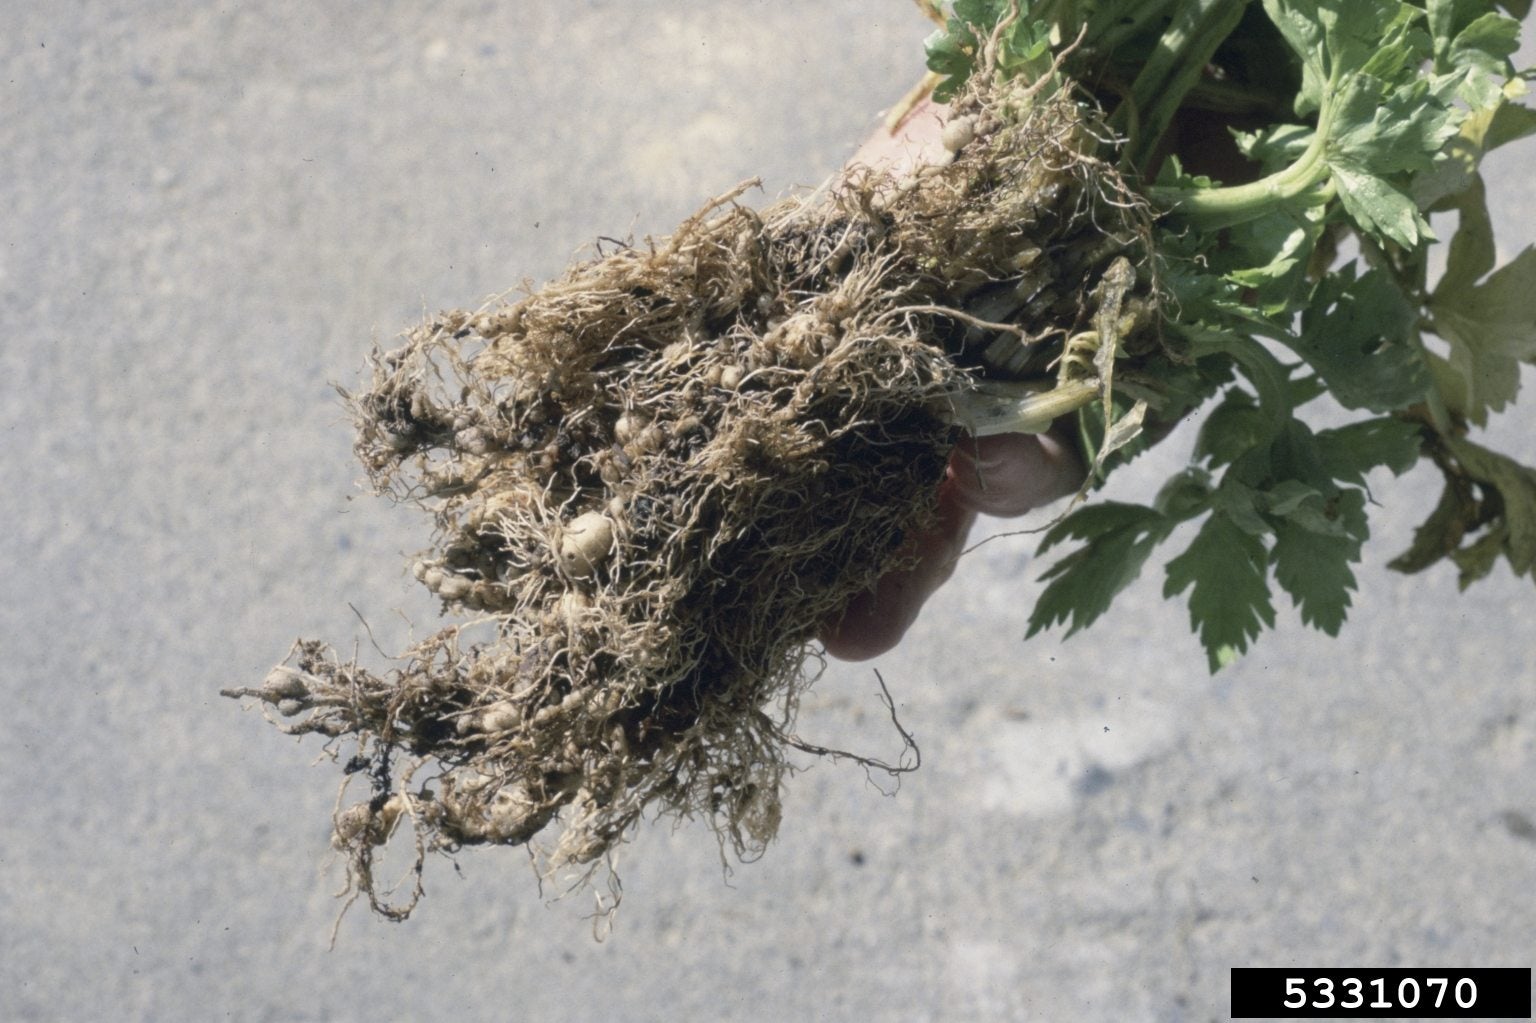 Celery Nematode Control - How To Manage Celery With Root Knot